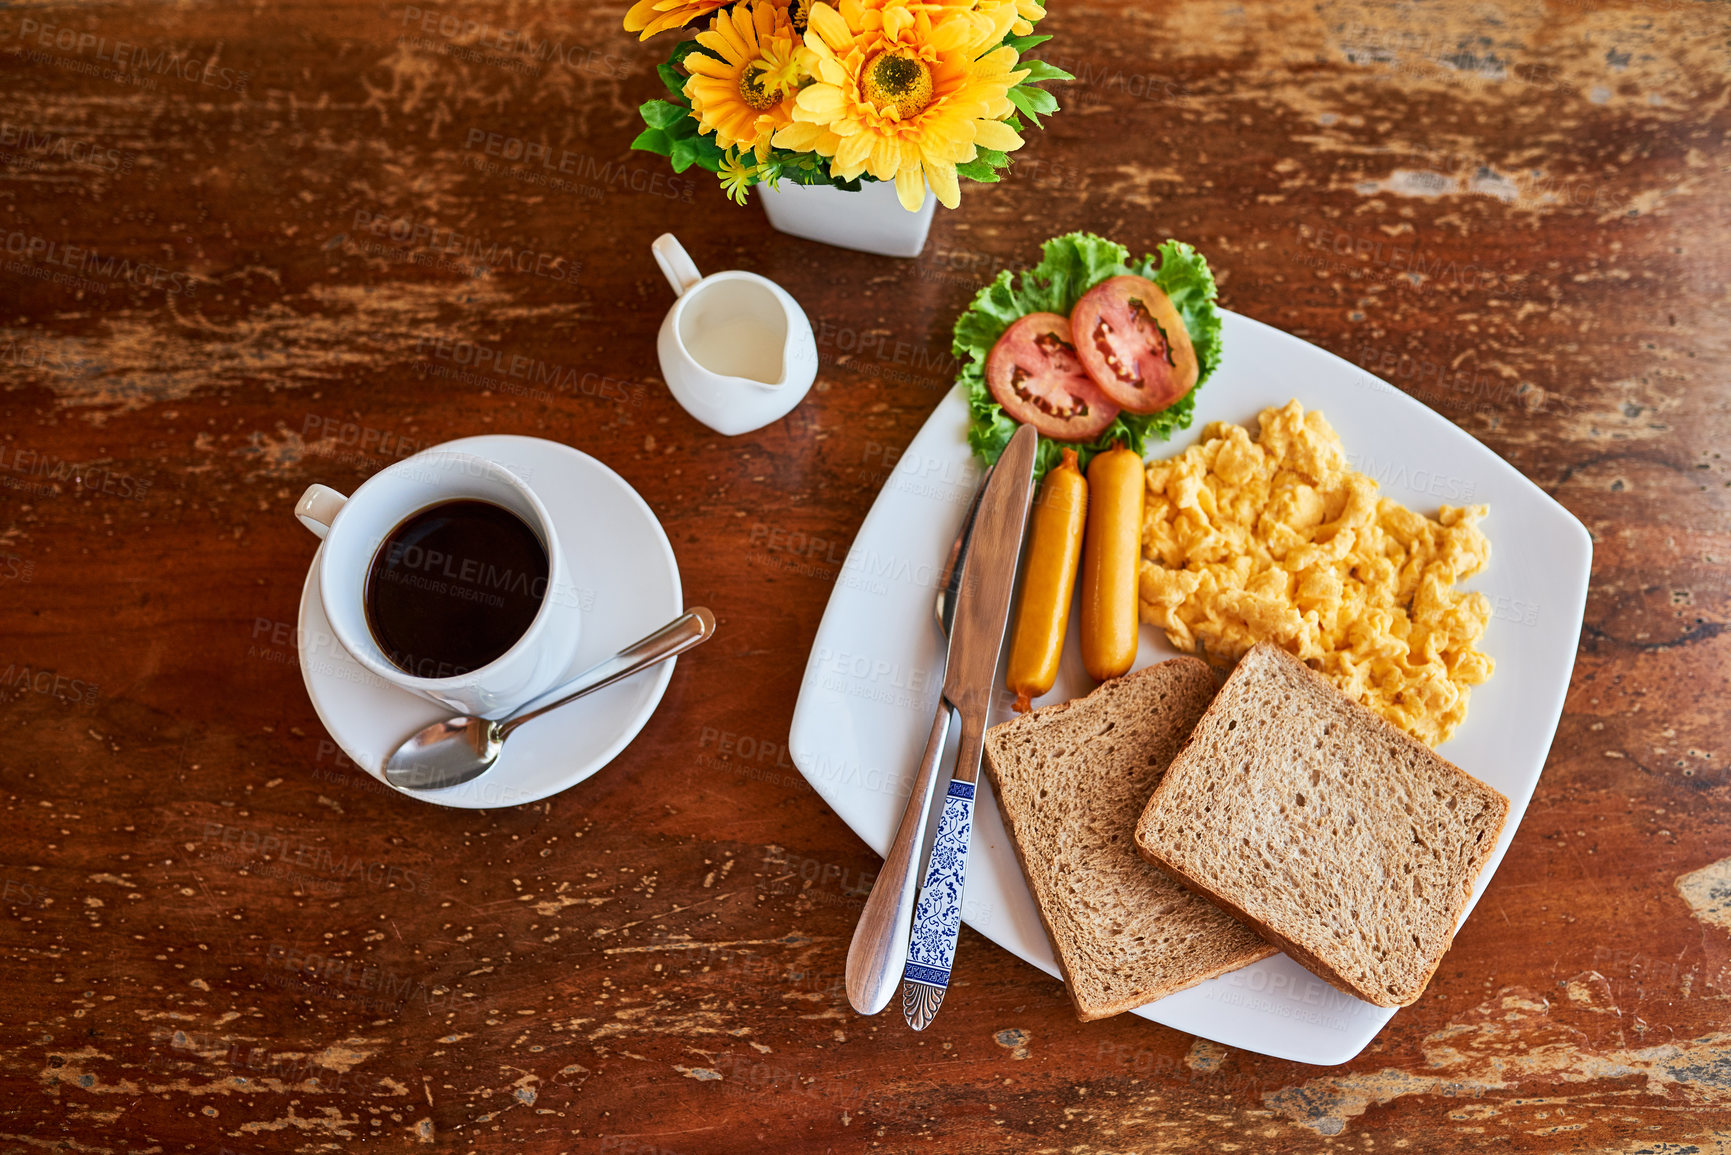 Buy stock photo High angle shot of a cup of coffee and freshly made breakfast on a table